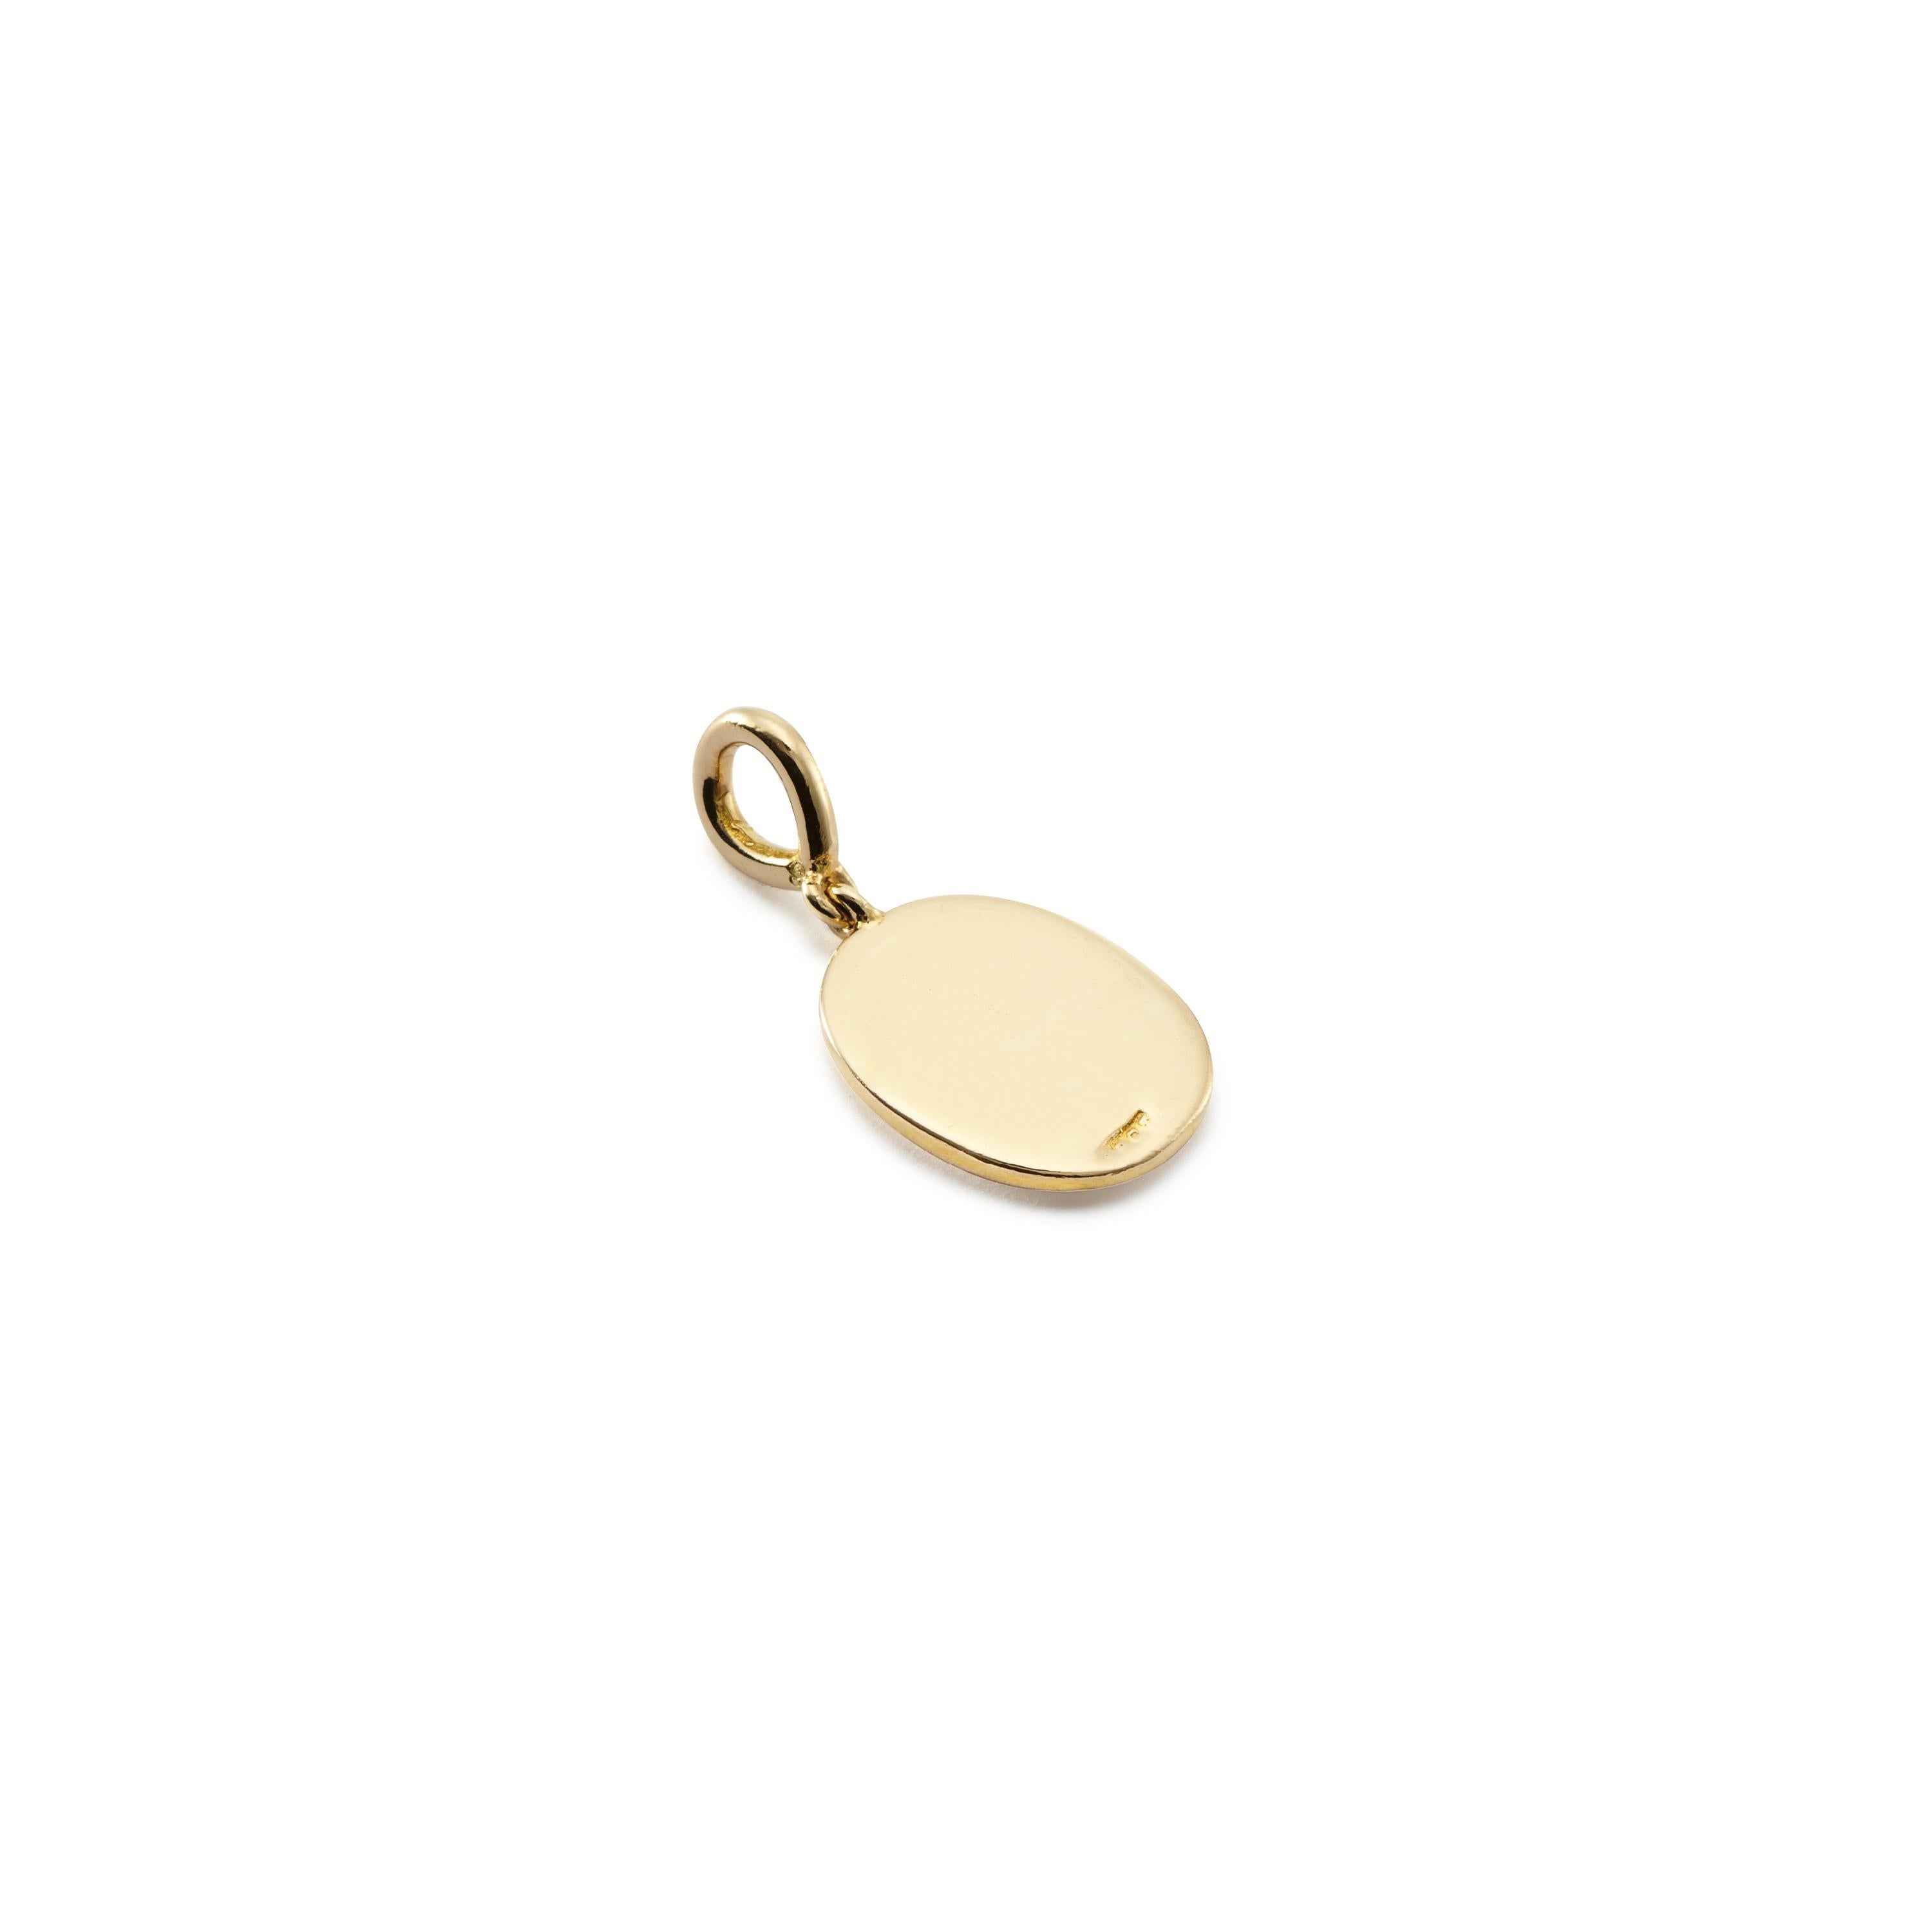 A simply elegant 18 Karat Gold charm featuring a vintage crest to be displayed on a favorite chain or bracelet.